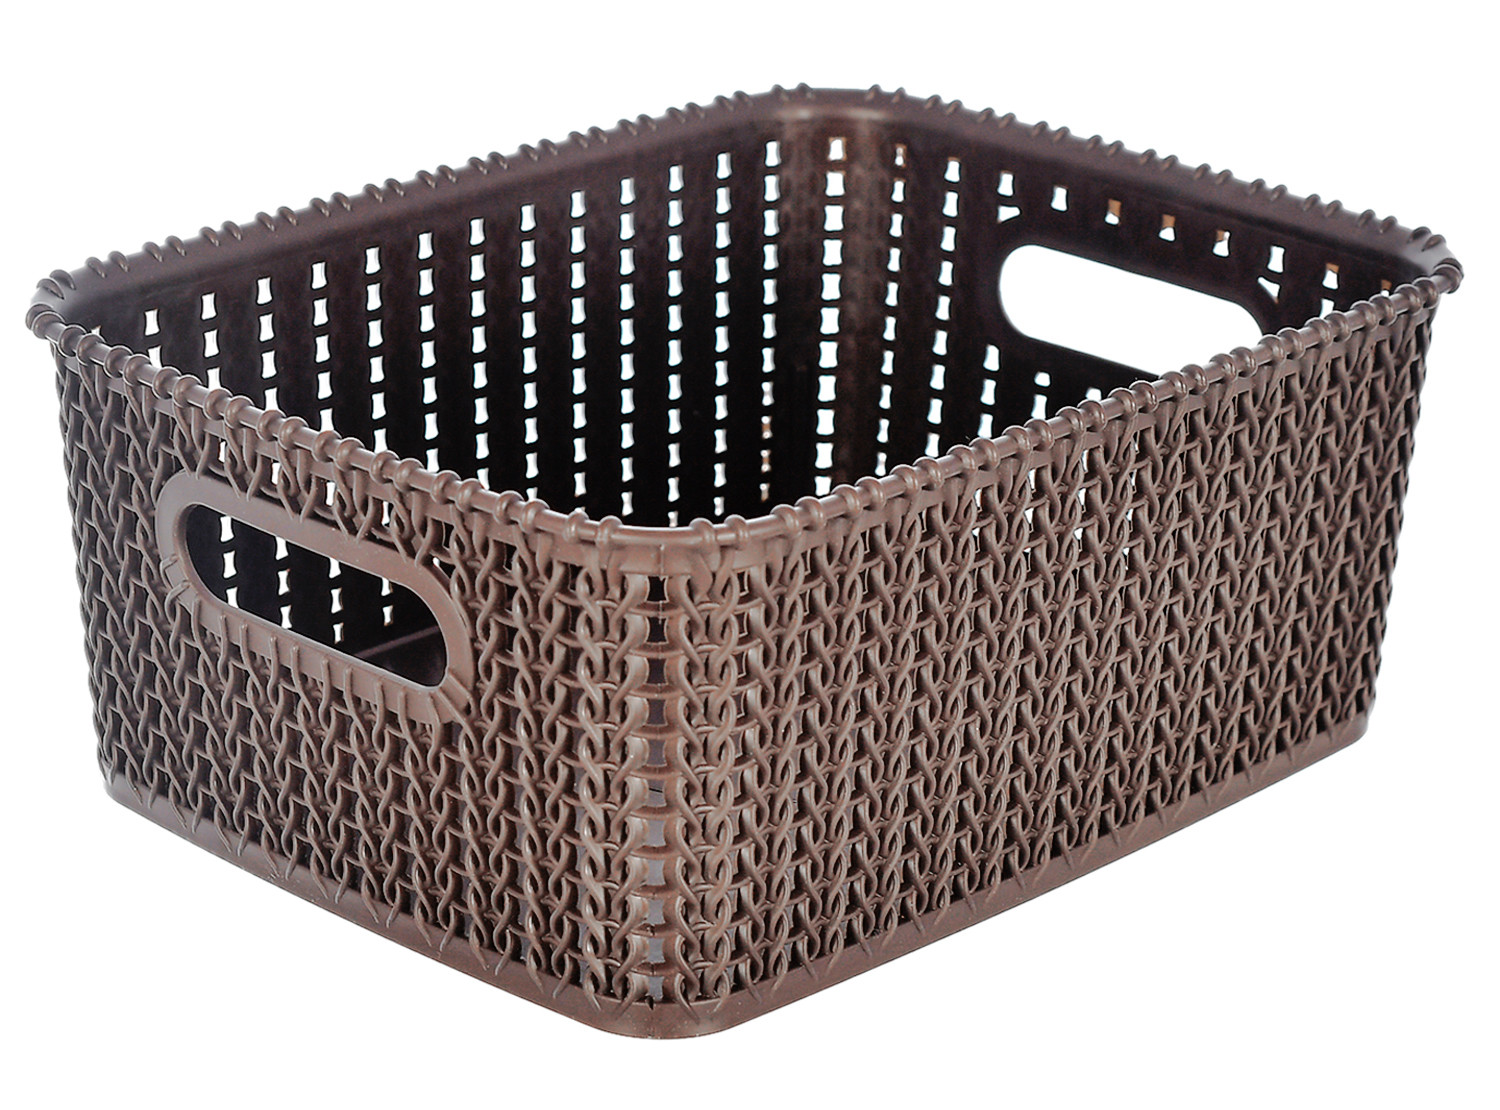 Kuber Industries Multiuses Large M 20 Plastic Tray/Basket/Organizer Without Lid- Pack of 3 (Brown & Grey & Brown) -46KM0105